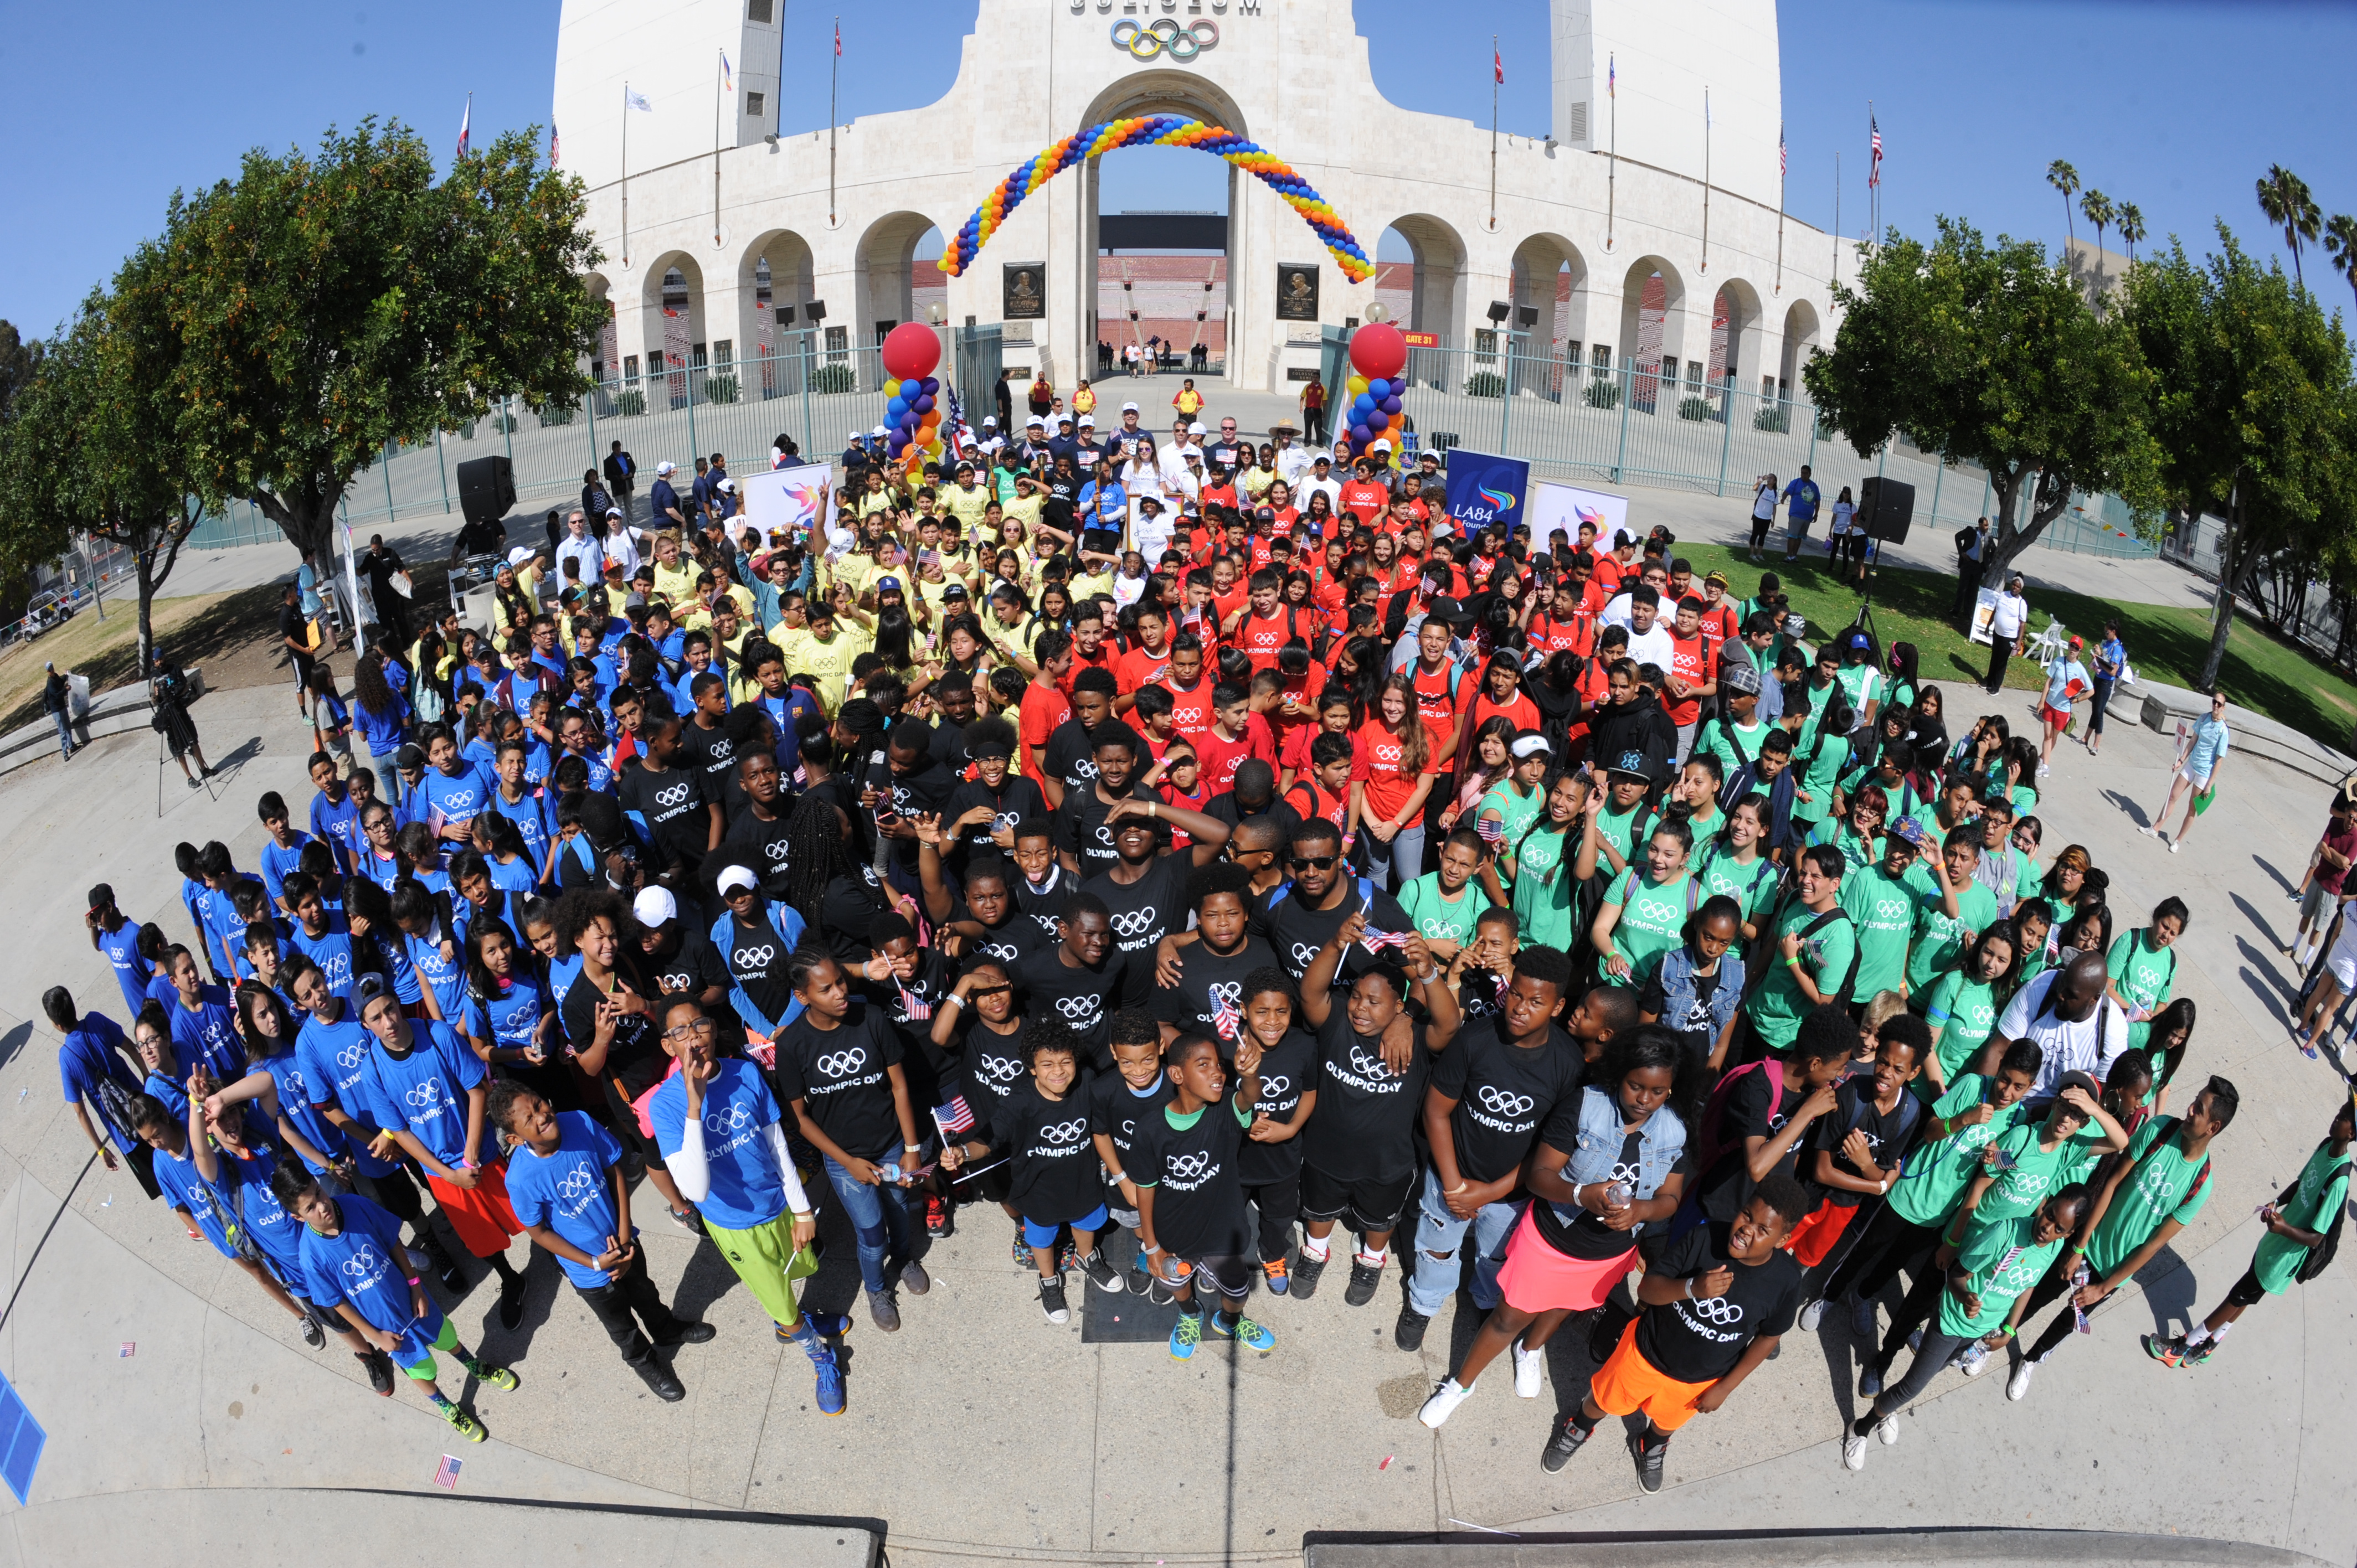 LA84 Hosts 500 Young Athletes for Olympic Day 2016 at LA Coliseum